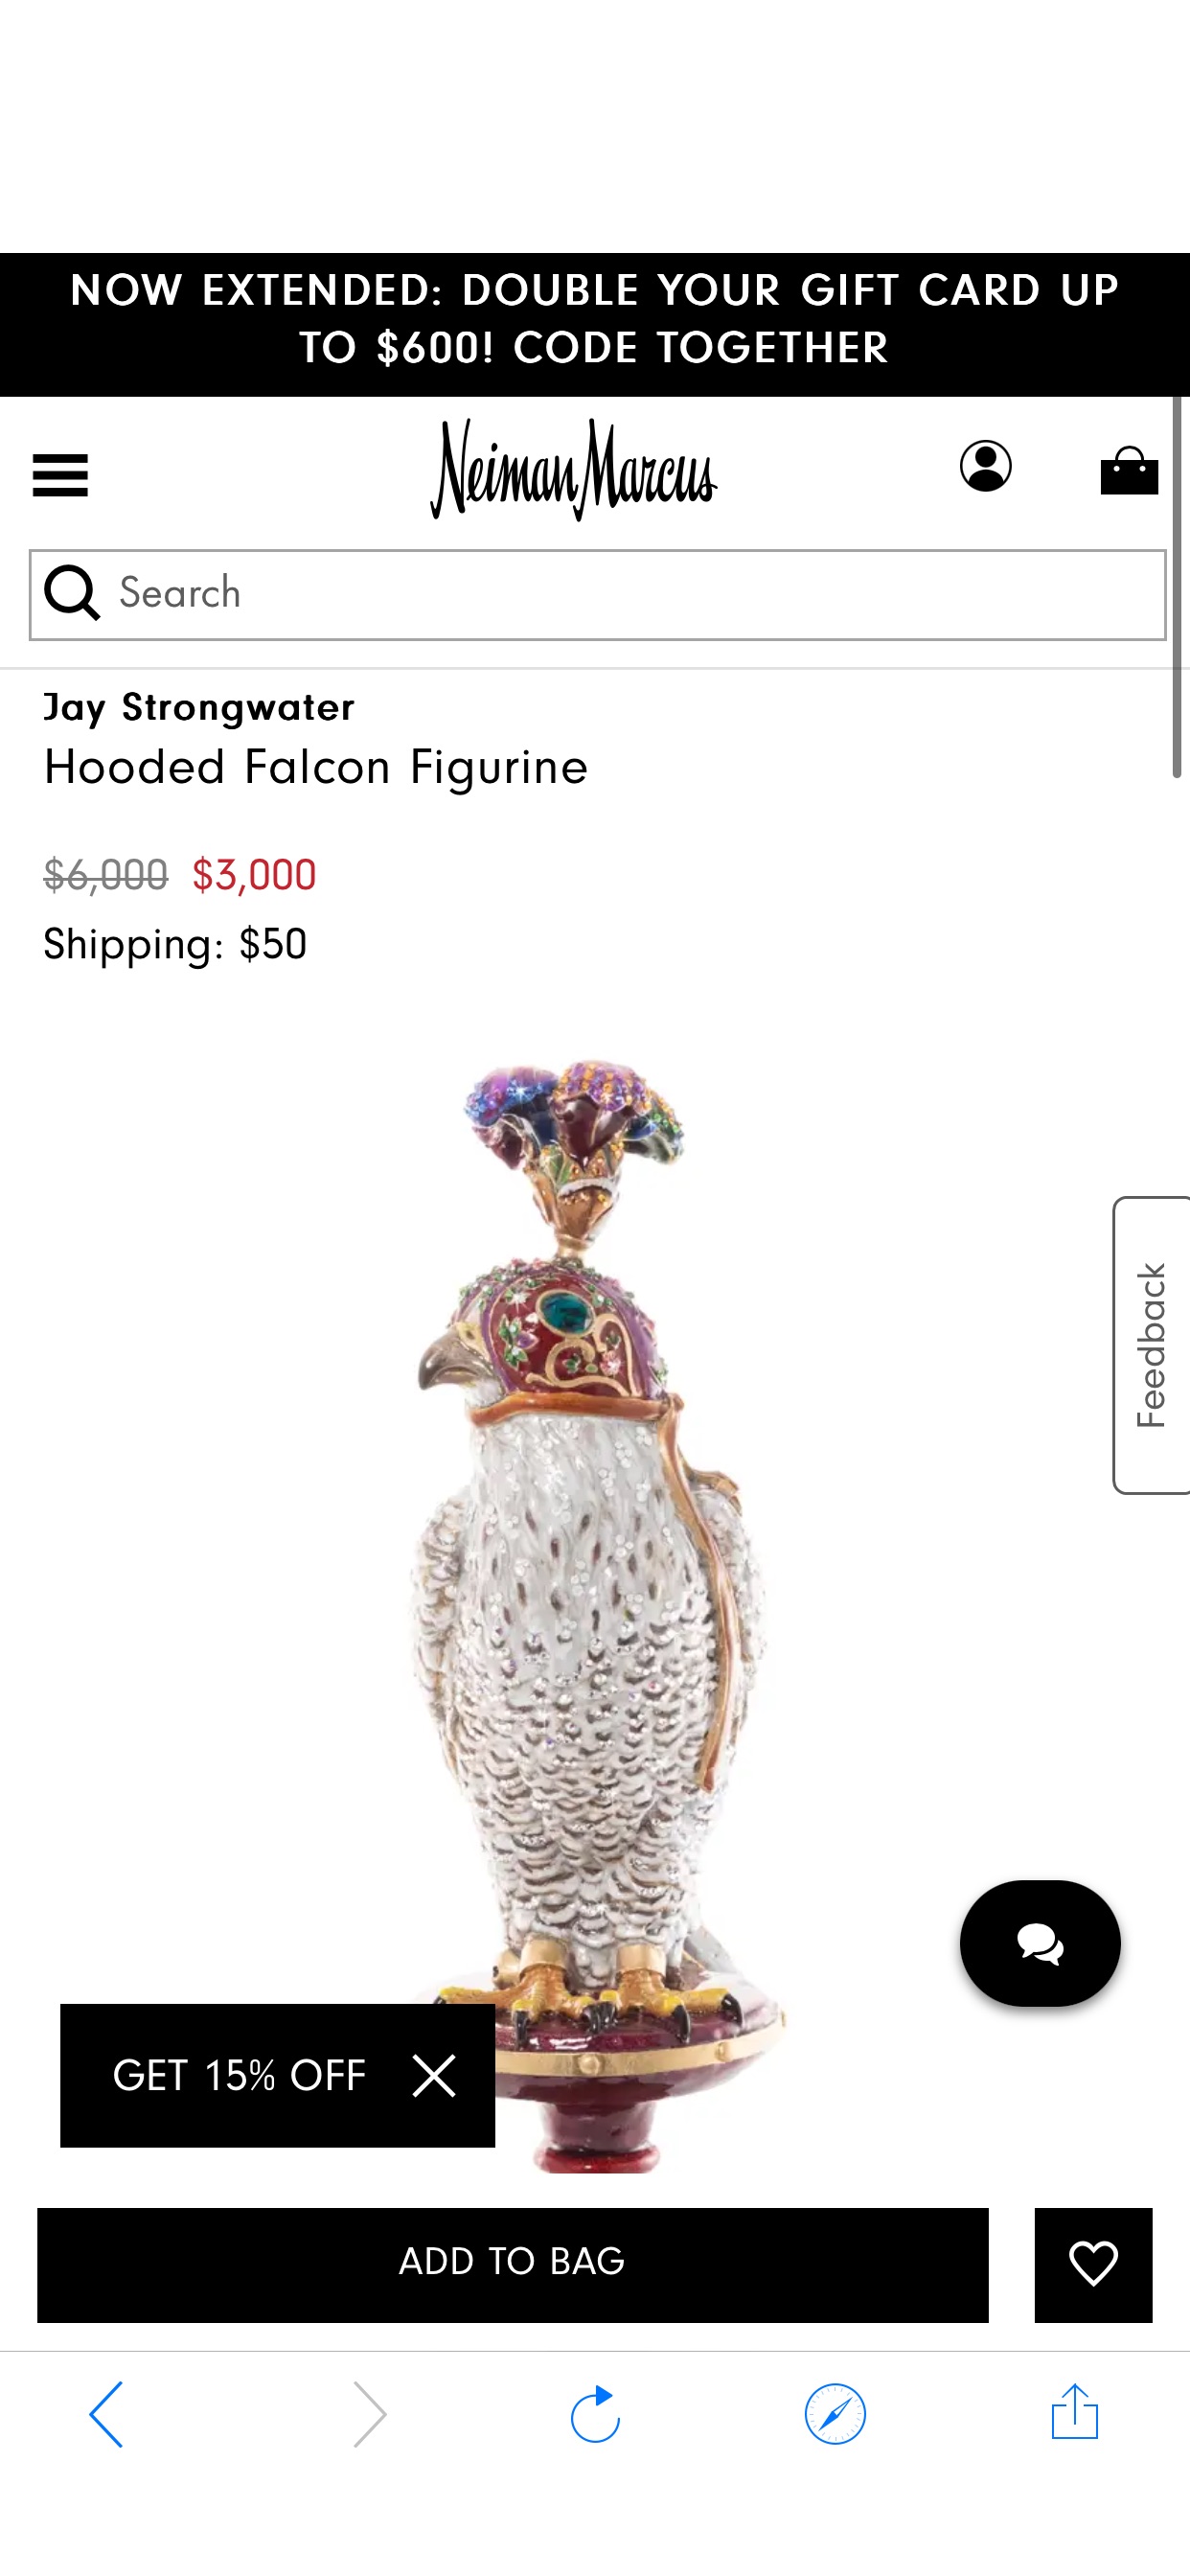 Jay Strongwater Hooded Falcon Figurine | Neiman Marcus